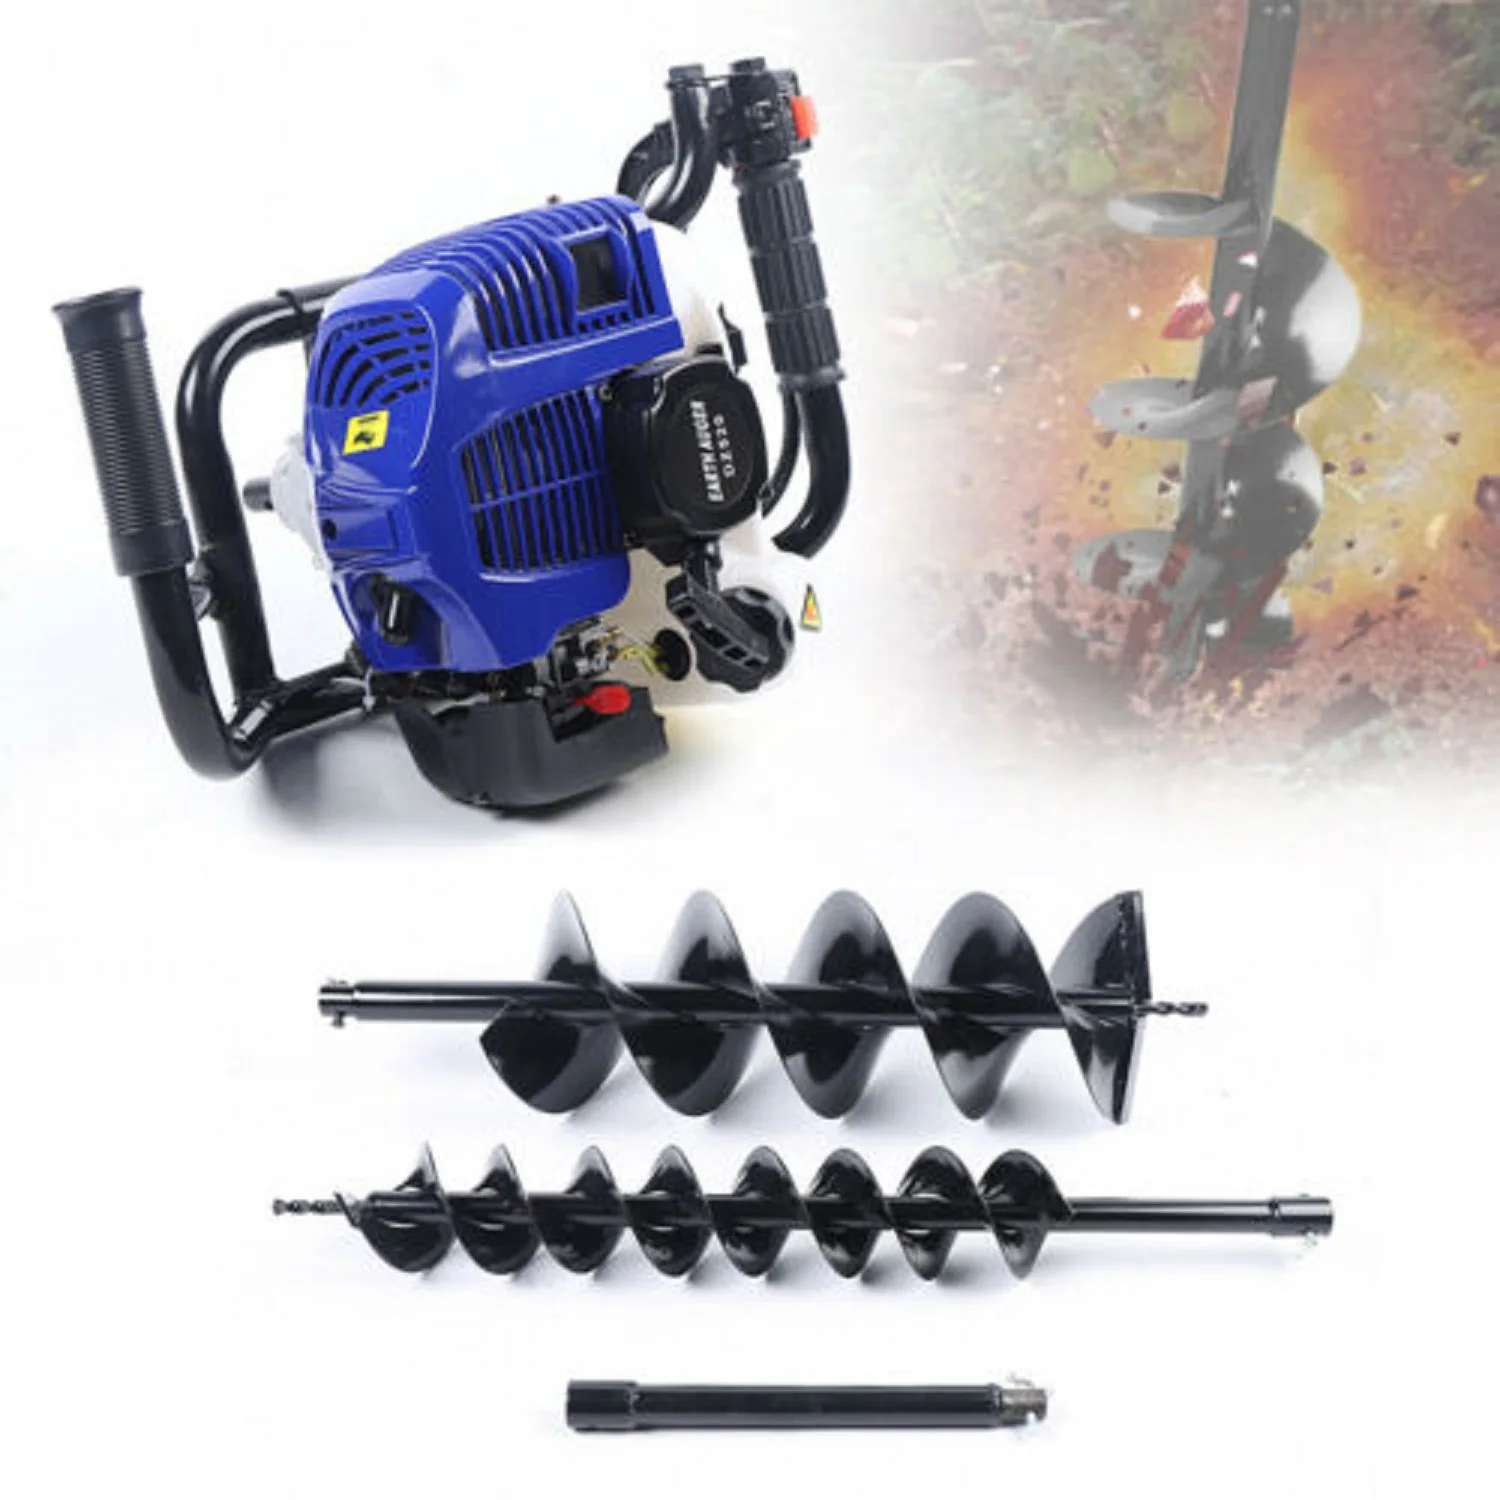 52CC Auger Post Hole Digger 2 Stroke Post Hole Auger Gas Powered +4/8” Drill Bit 52cc Post Hole Digger Earth Auger Petrol